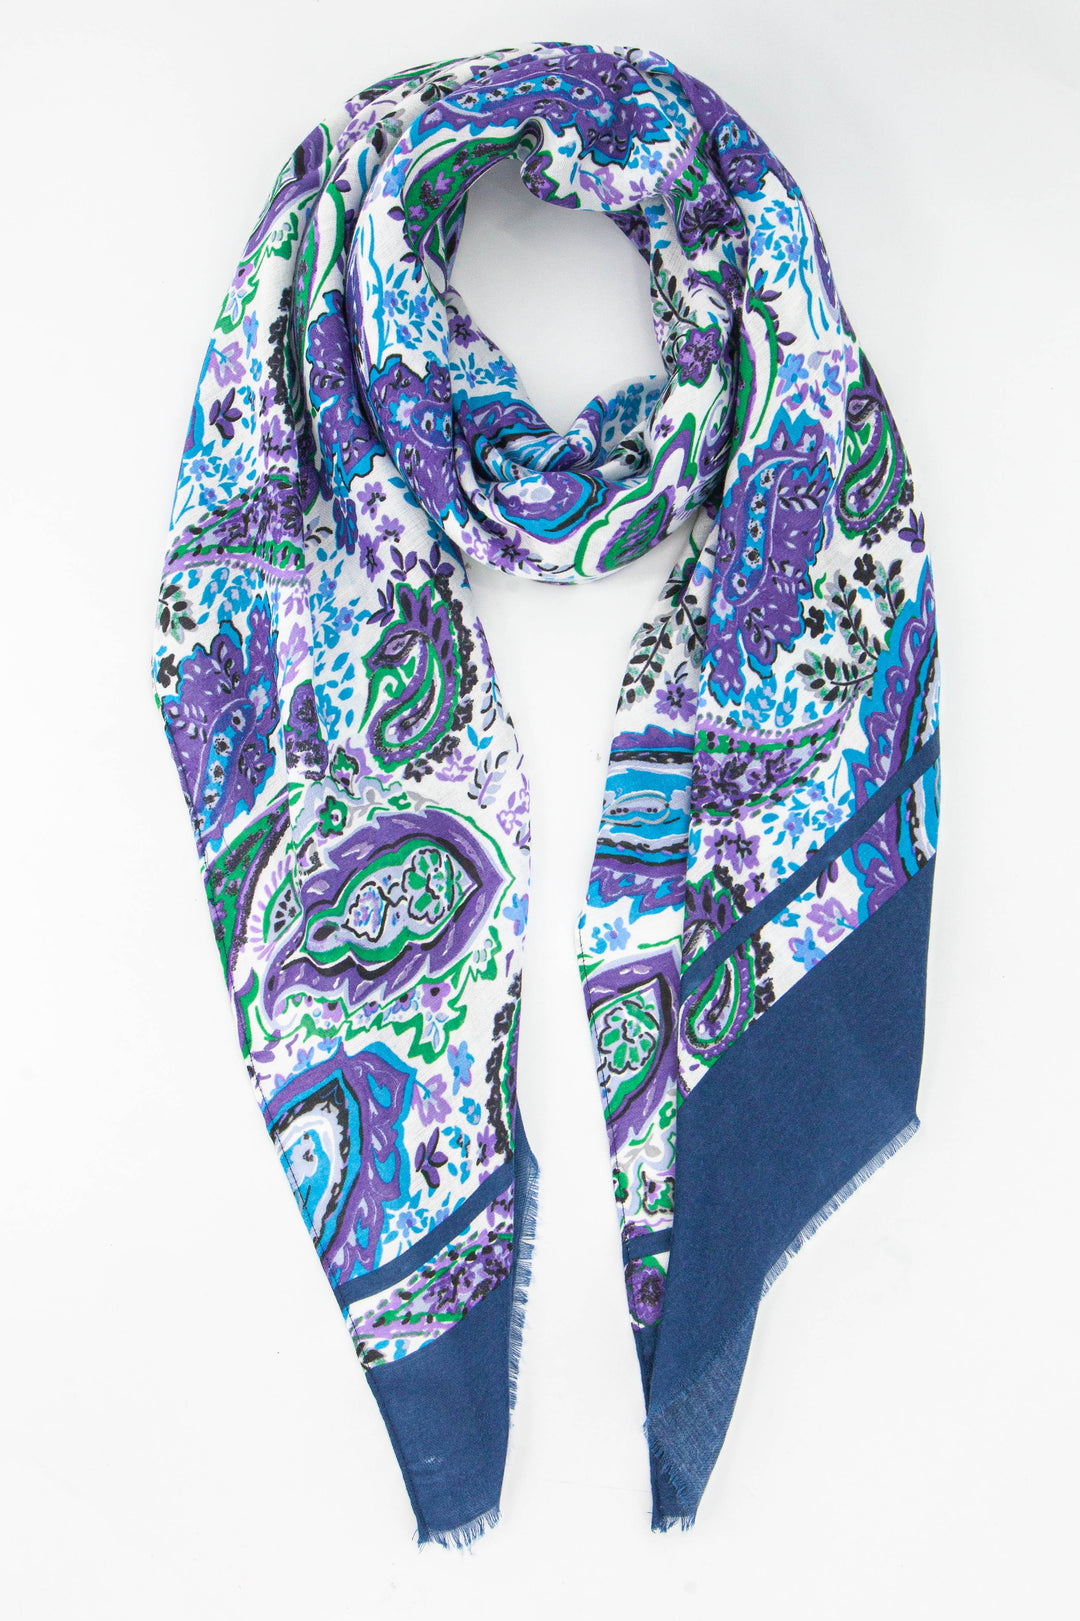 vintage style paisley print lightweight scarf with a blue colour block border, the paisley pattern is blue, purple and green